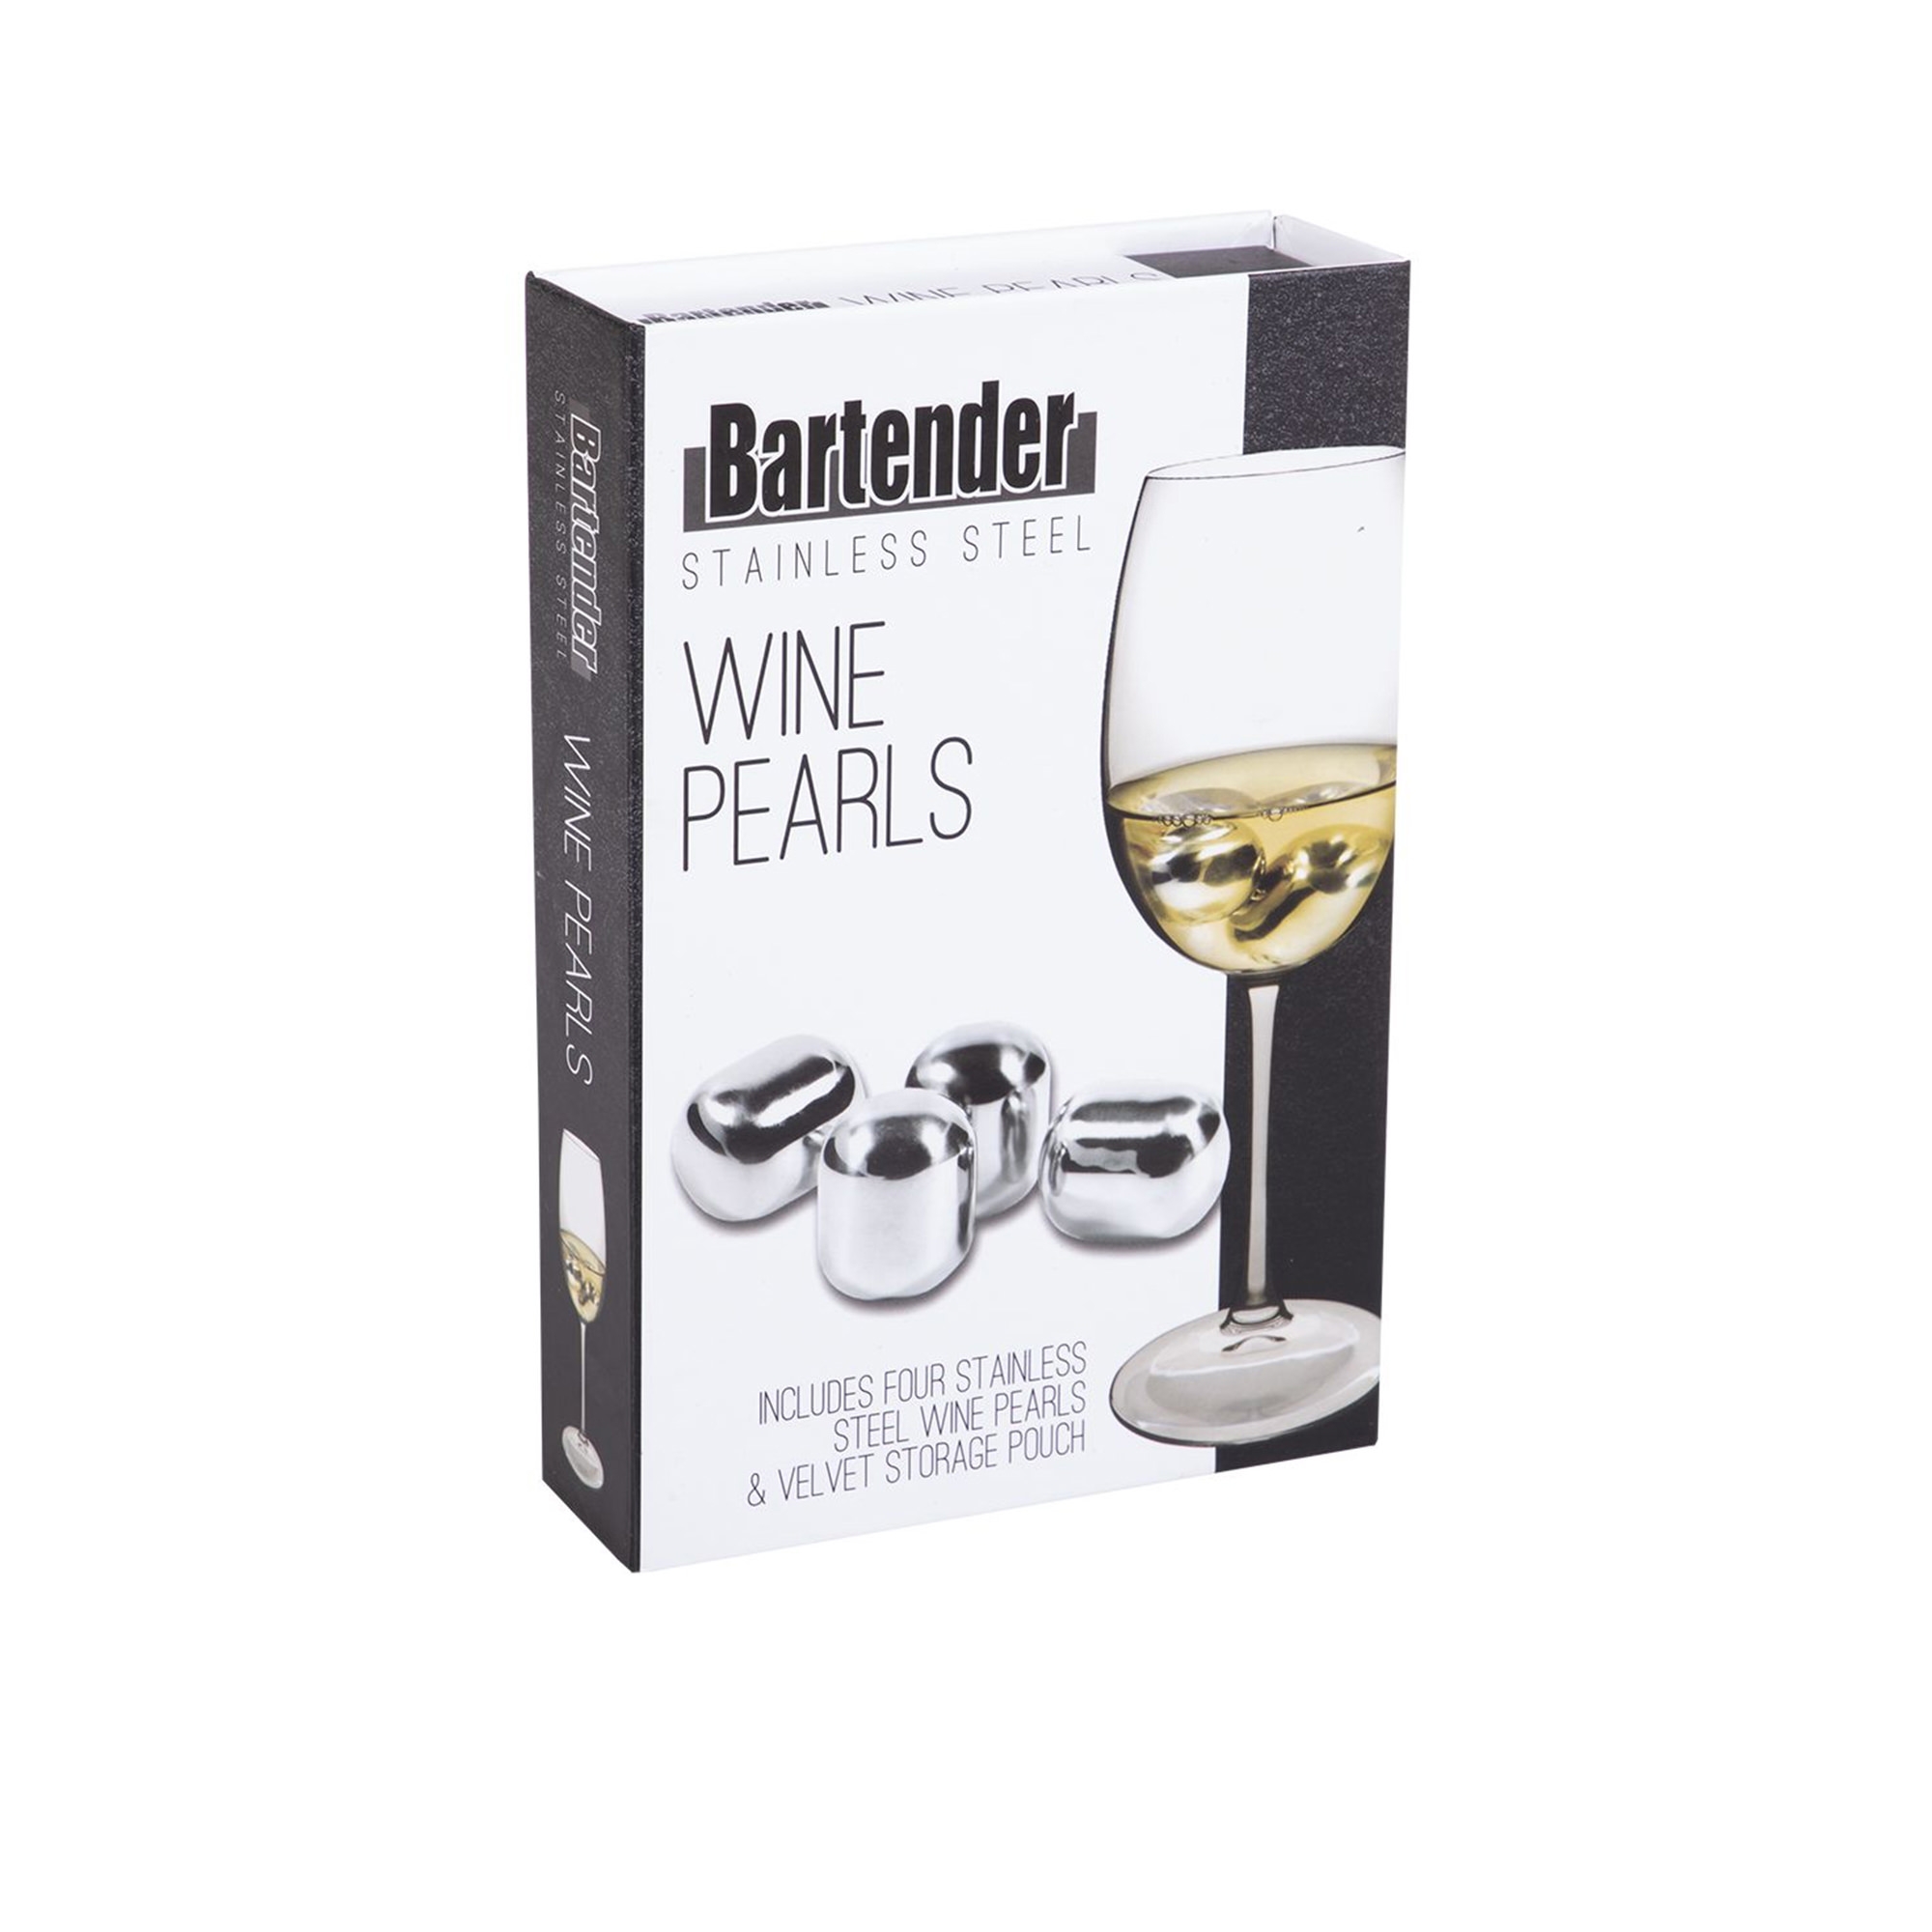 Bartender Stainless Steel Wine Pearls with Bag Set of 4 Image 2